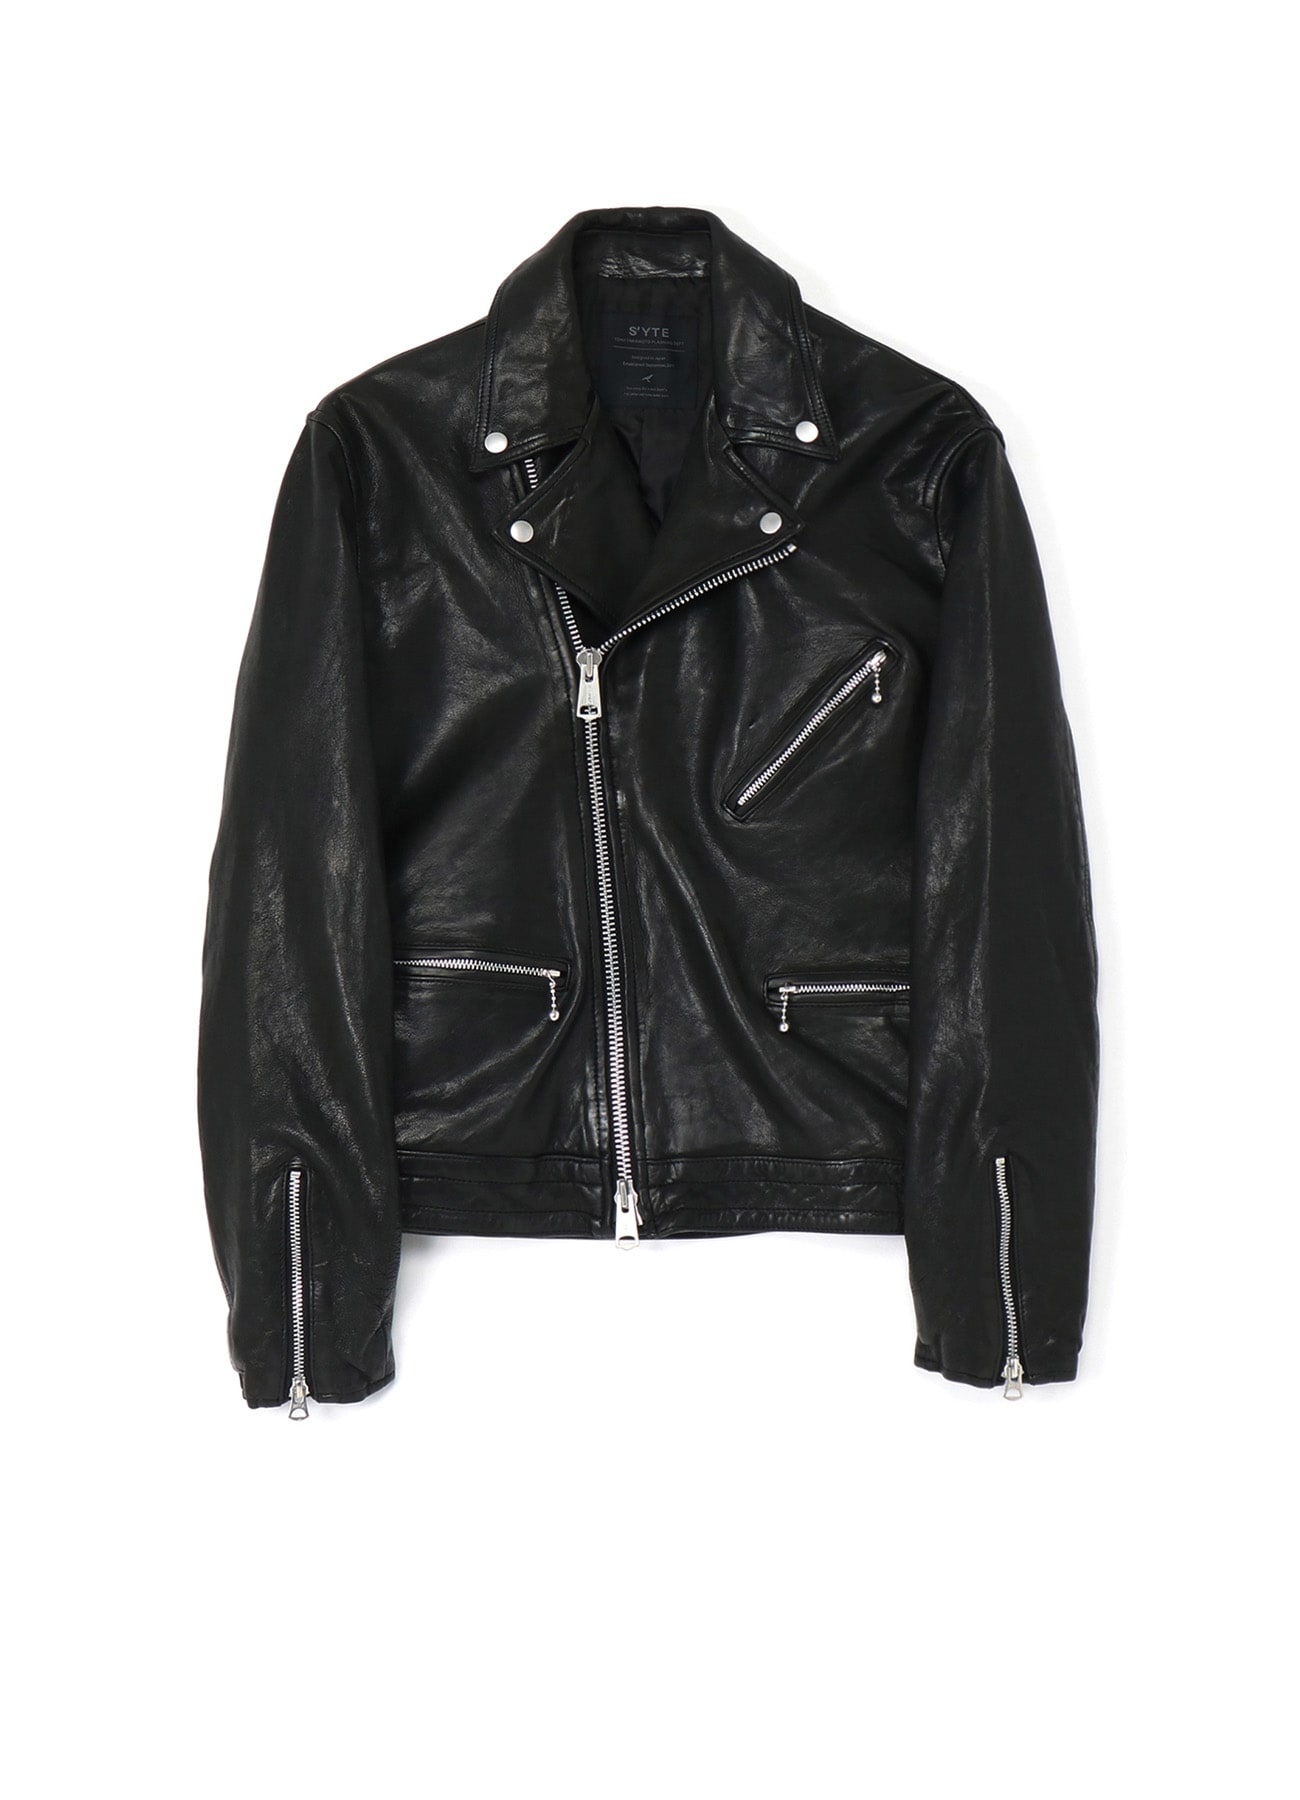 VEGETABLE TANNED AND WASHED SHEEP LEATHER DOUBLE RIDERS JACKET